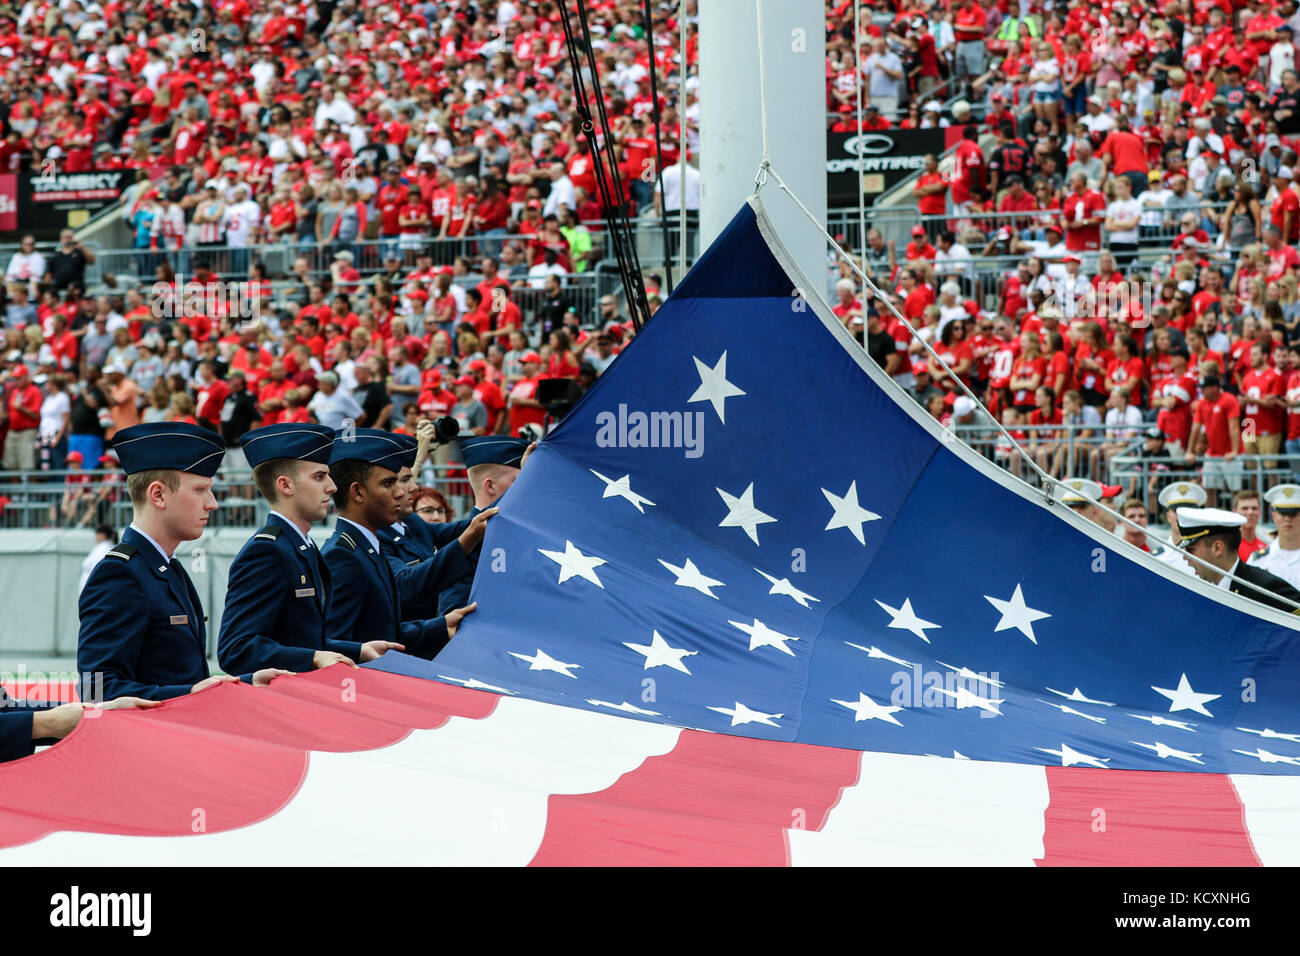 Members of The Ohio State University Reserve Officers’ Training Corps raise the U.S. flag before kickoff of the OSU-Army game Sept. 16, 2017, at Ohio Stadium in Columbus, Ohio. It was the first time the teams have played against each other, although both have fielded football teams for more than 100 years. (Ohio National Guard photo by Staff Sgt. Michael Carden) Stock Photo